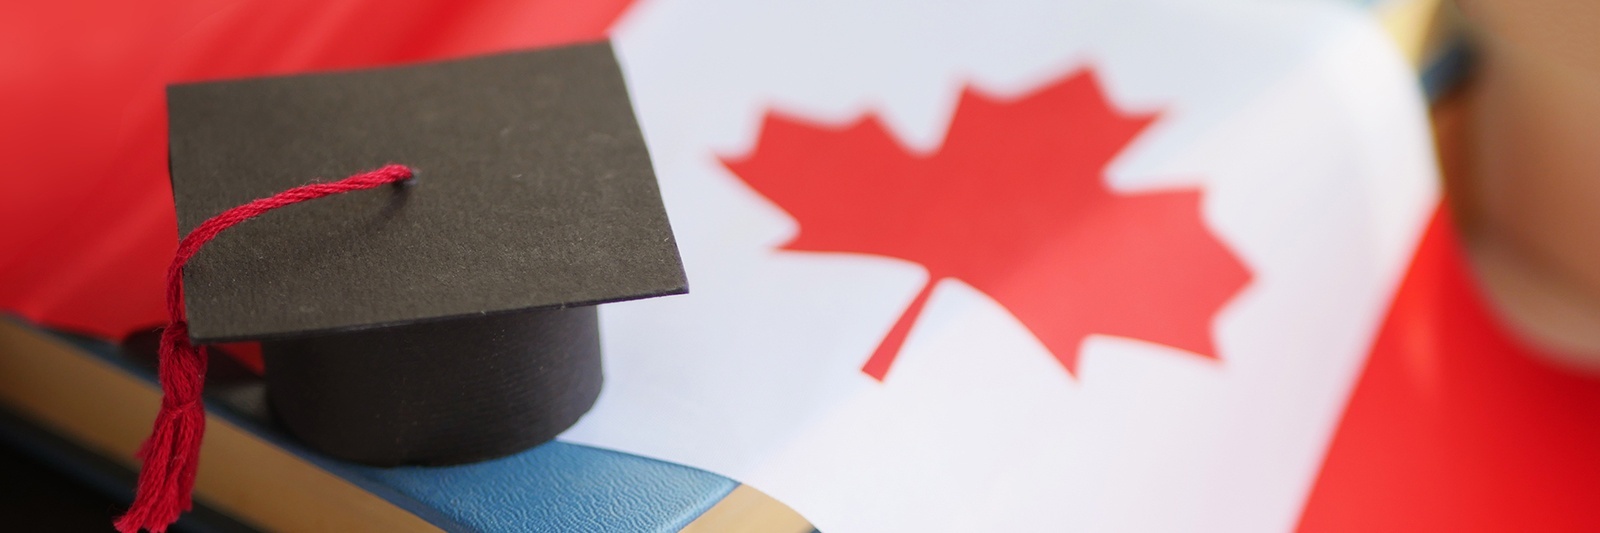 The Post Graduation Work Permit Program enables students to gain valuable Canadian work experience after graduation